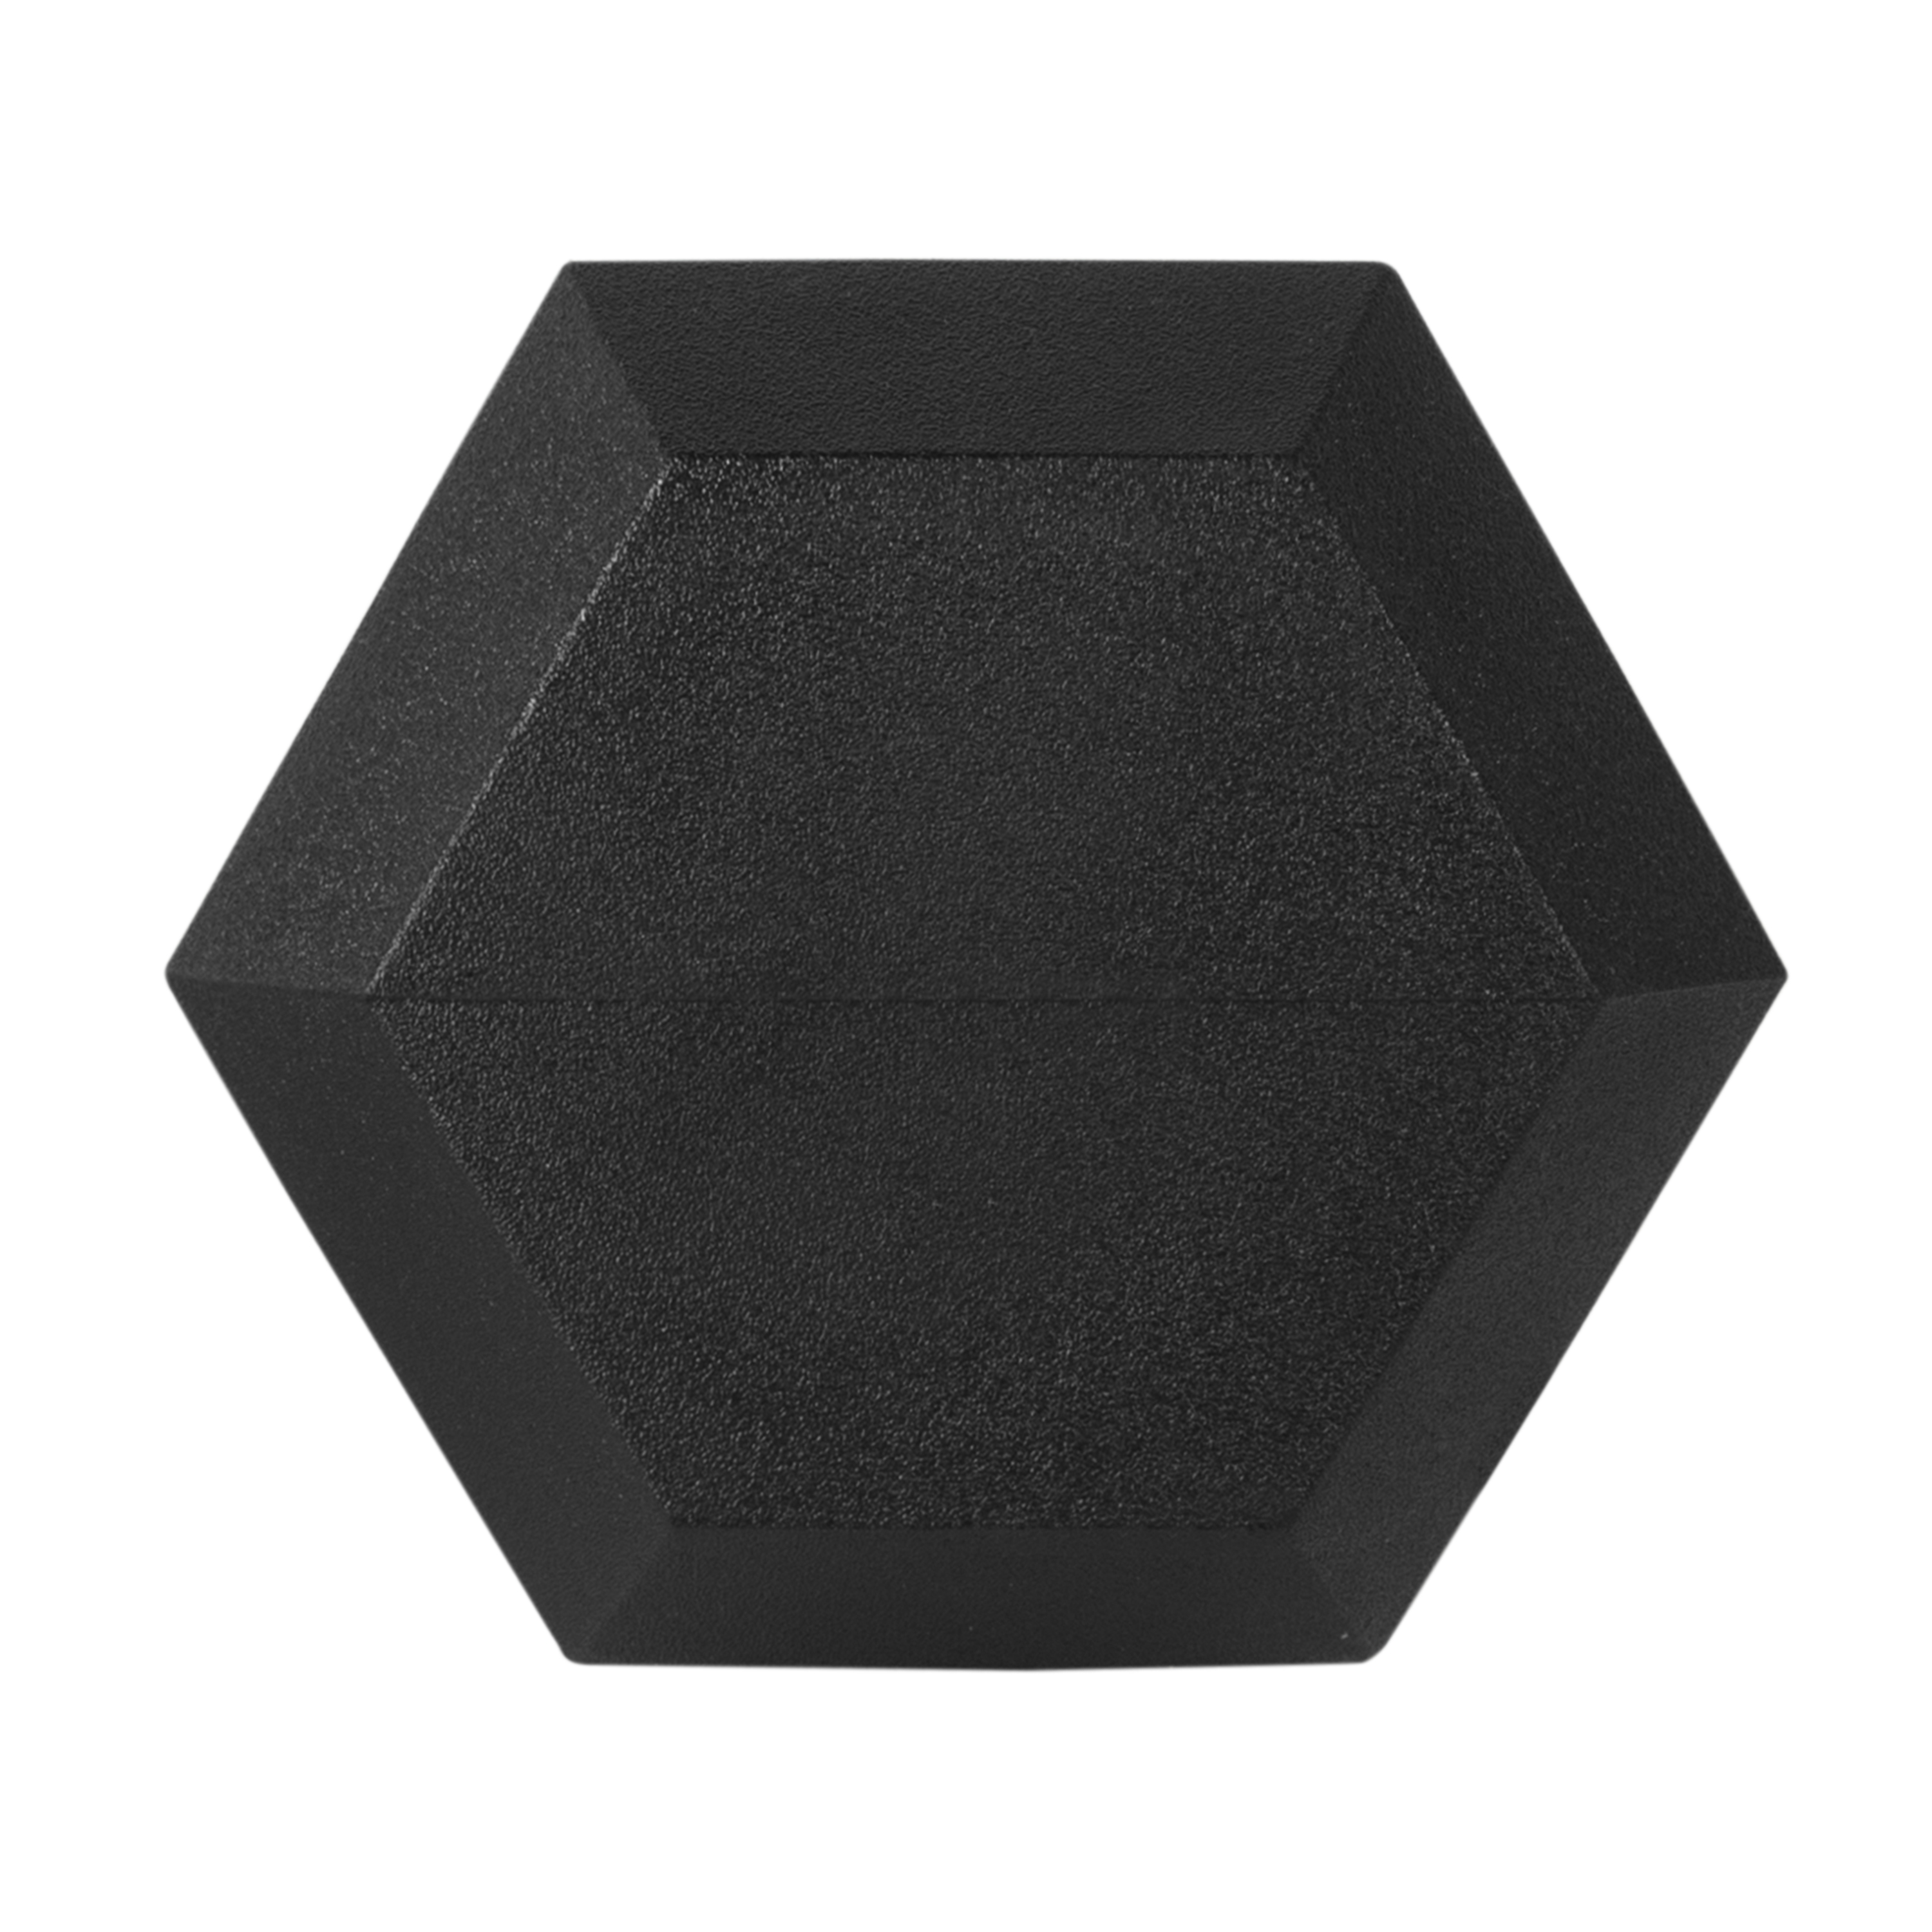 CAP Barbell, 12lb Coated Hex Dumbbell, Single - image 5 of 6